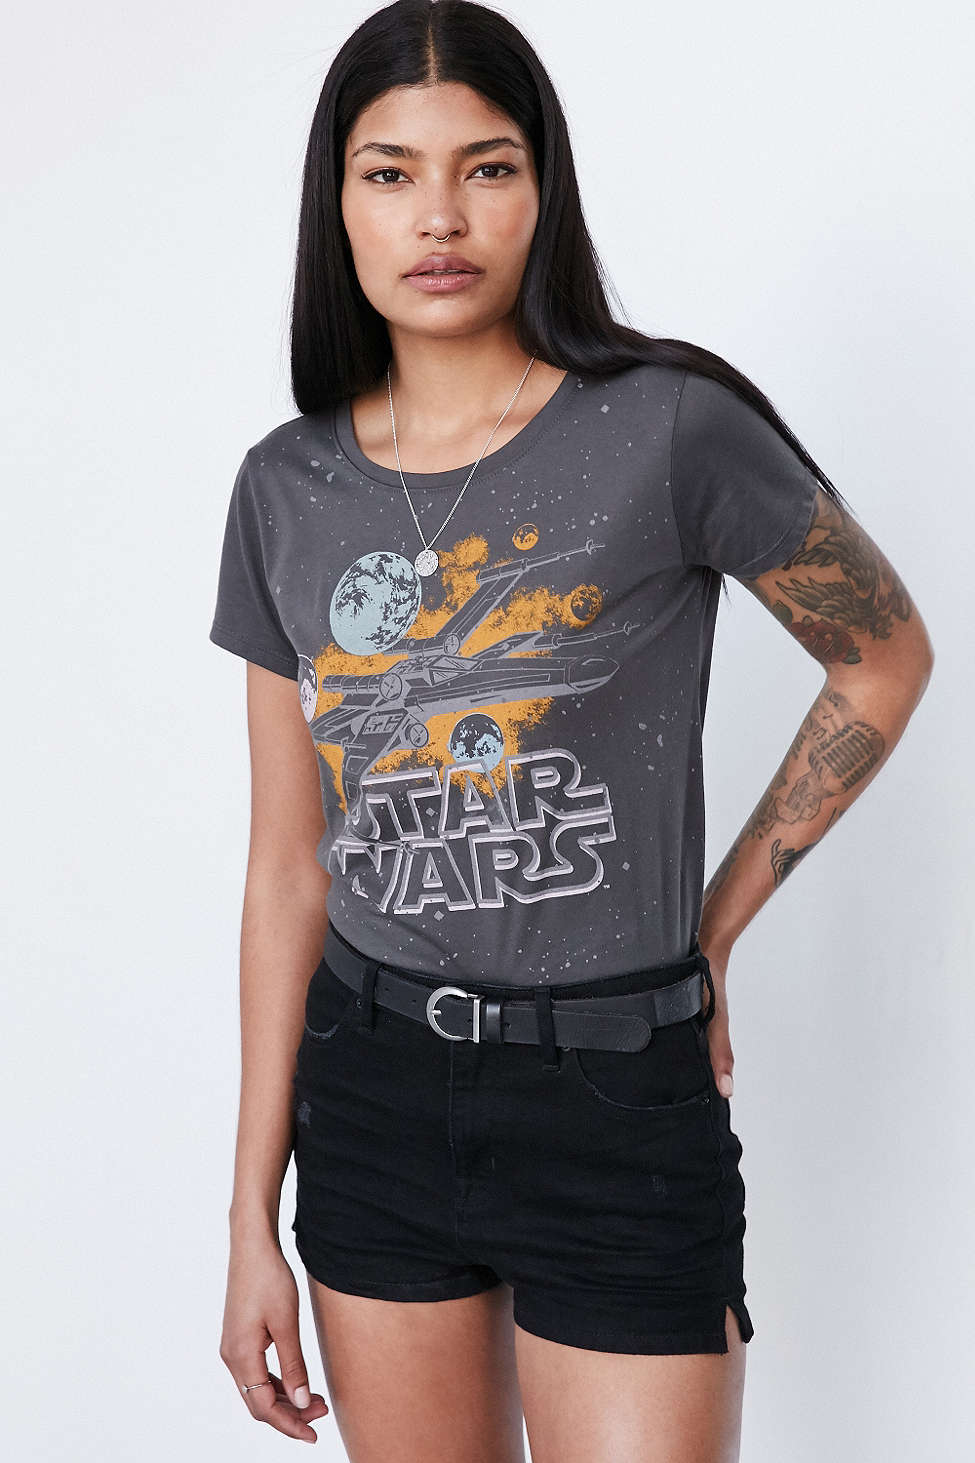 Star Wars Galaxy tee at Urban Outfitters